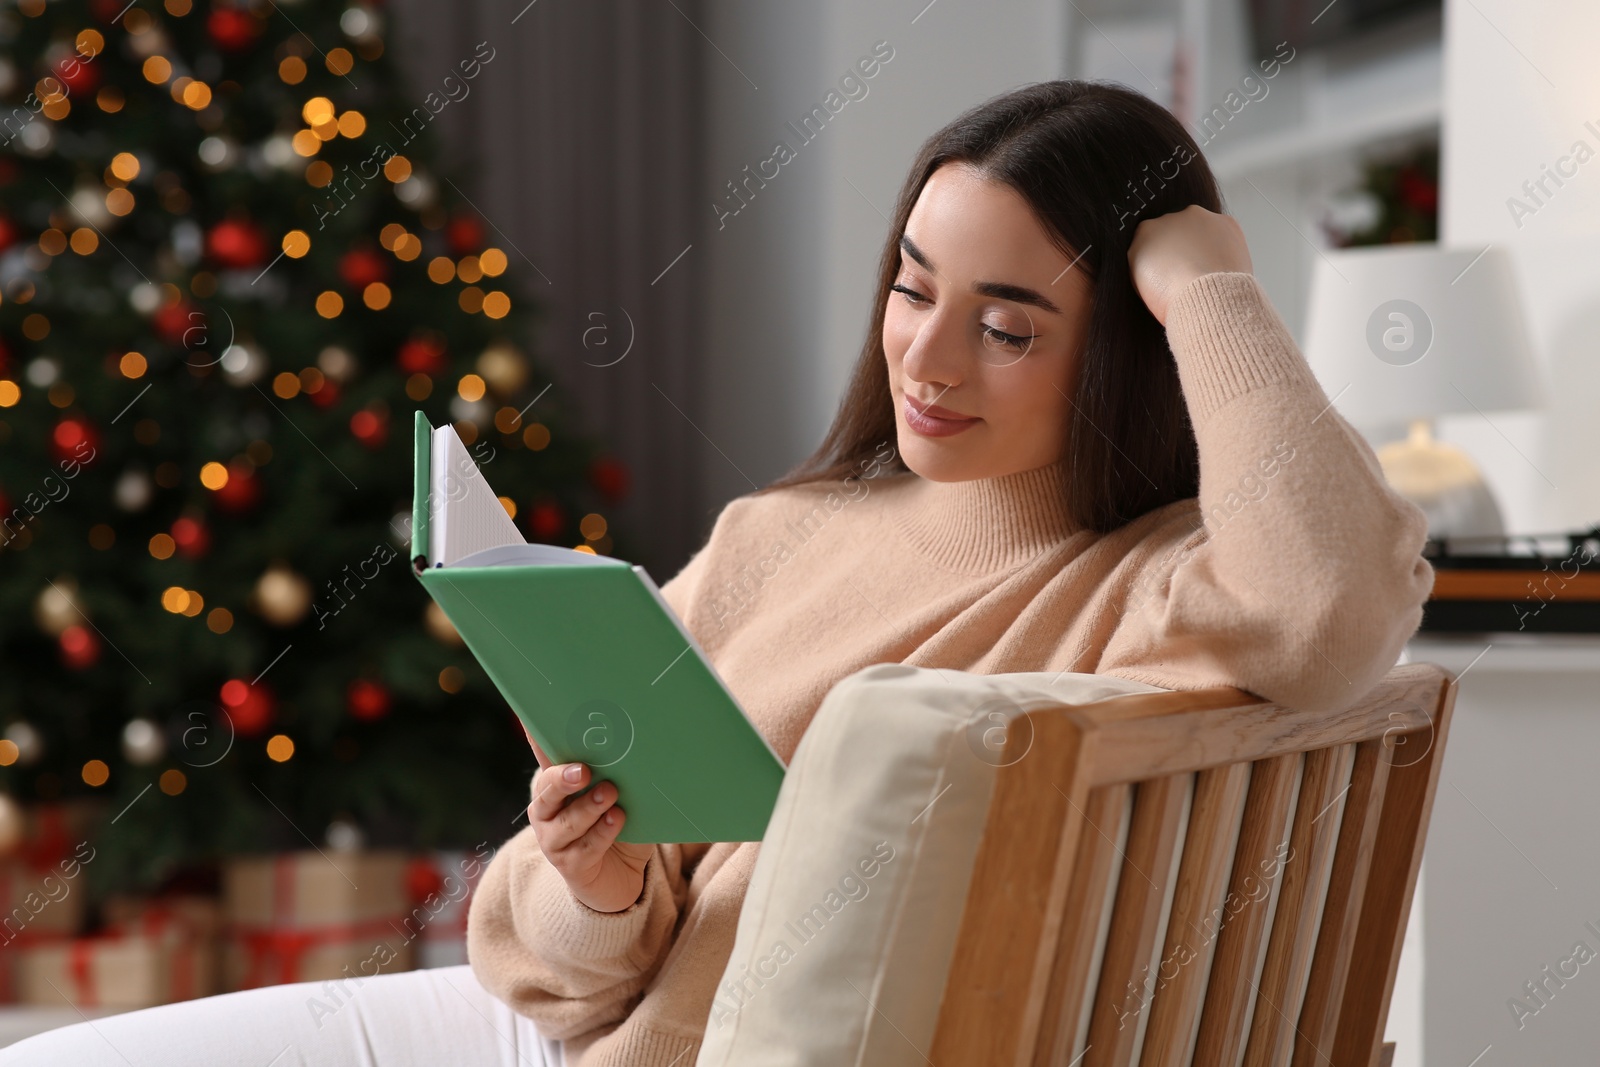 Photo of Woman reading book near Christmas tree indoors